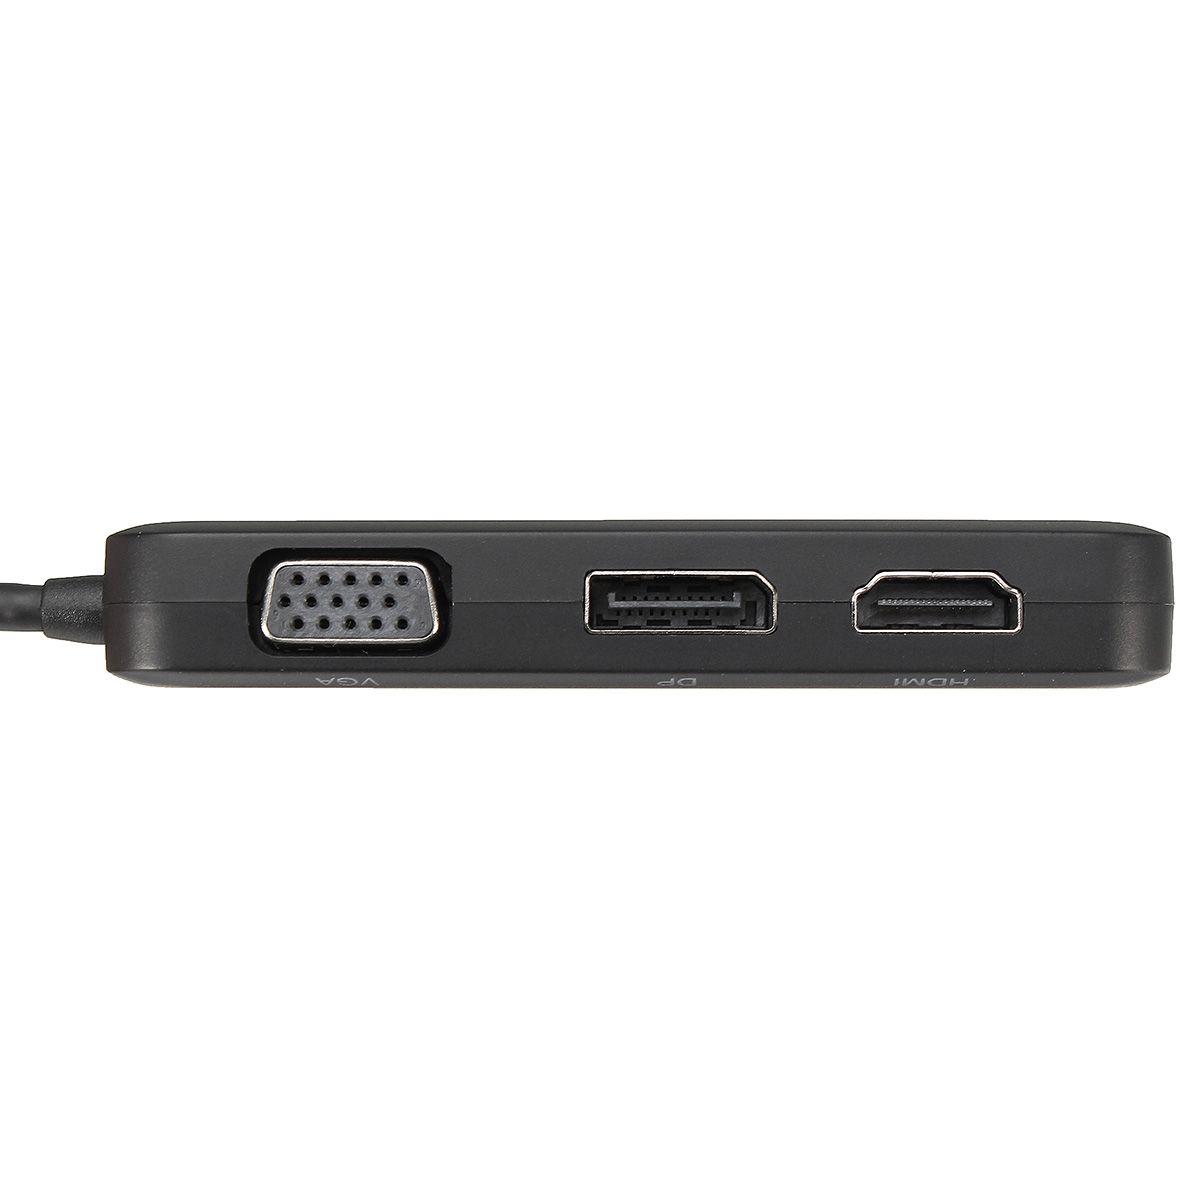 USB-31-Type-C-To-HD-DP-DVI-VGA-4K-Cable-Adapter-4-in-1-Converter-1202186